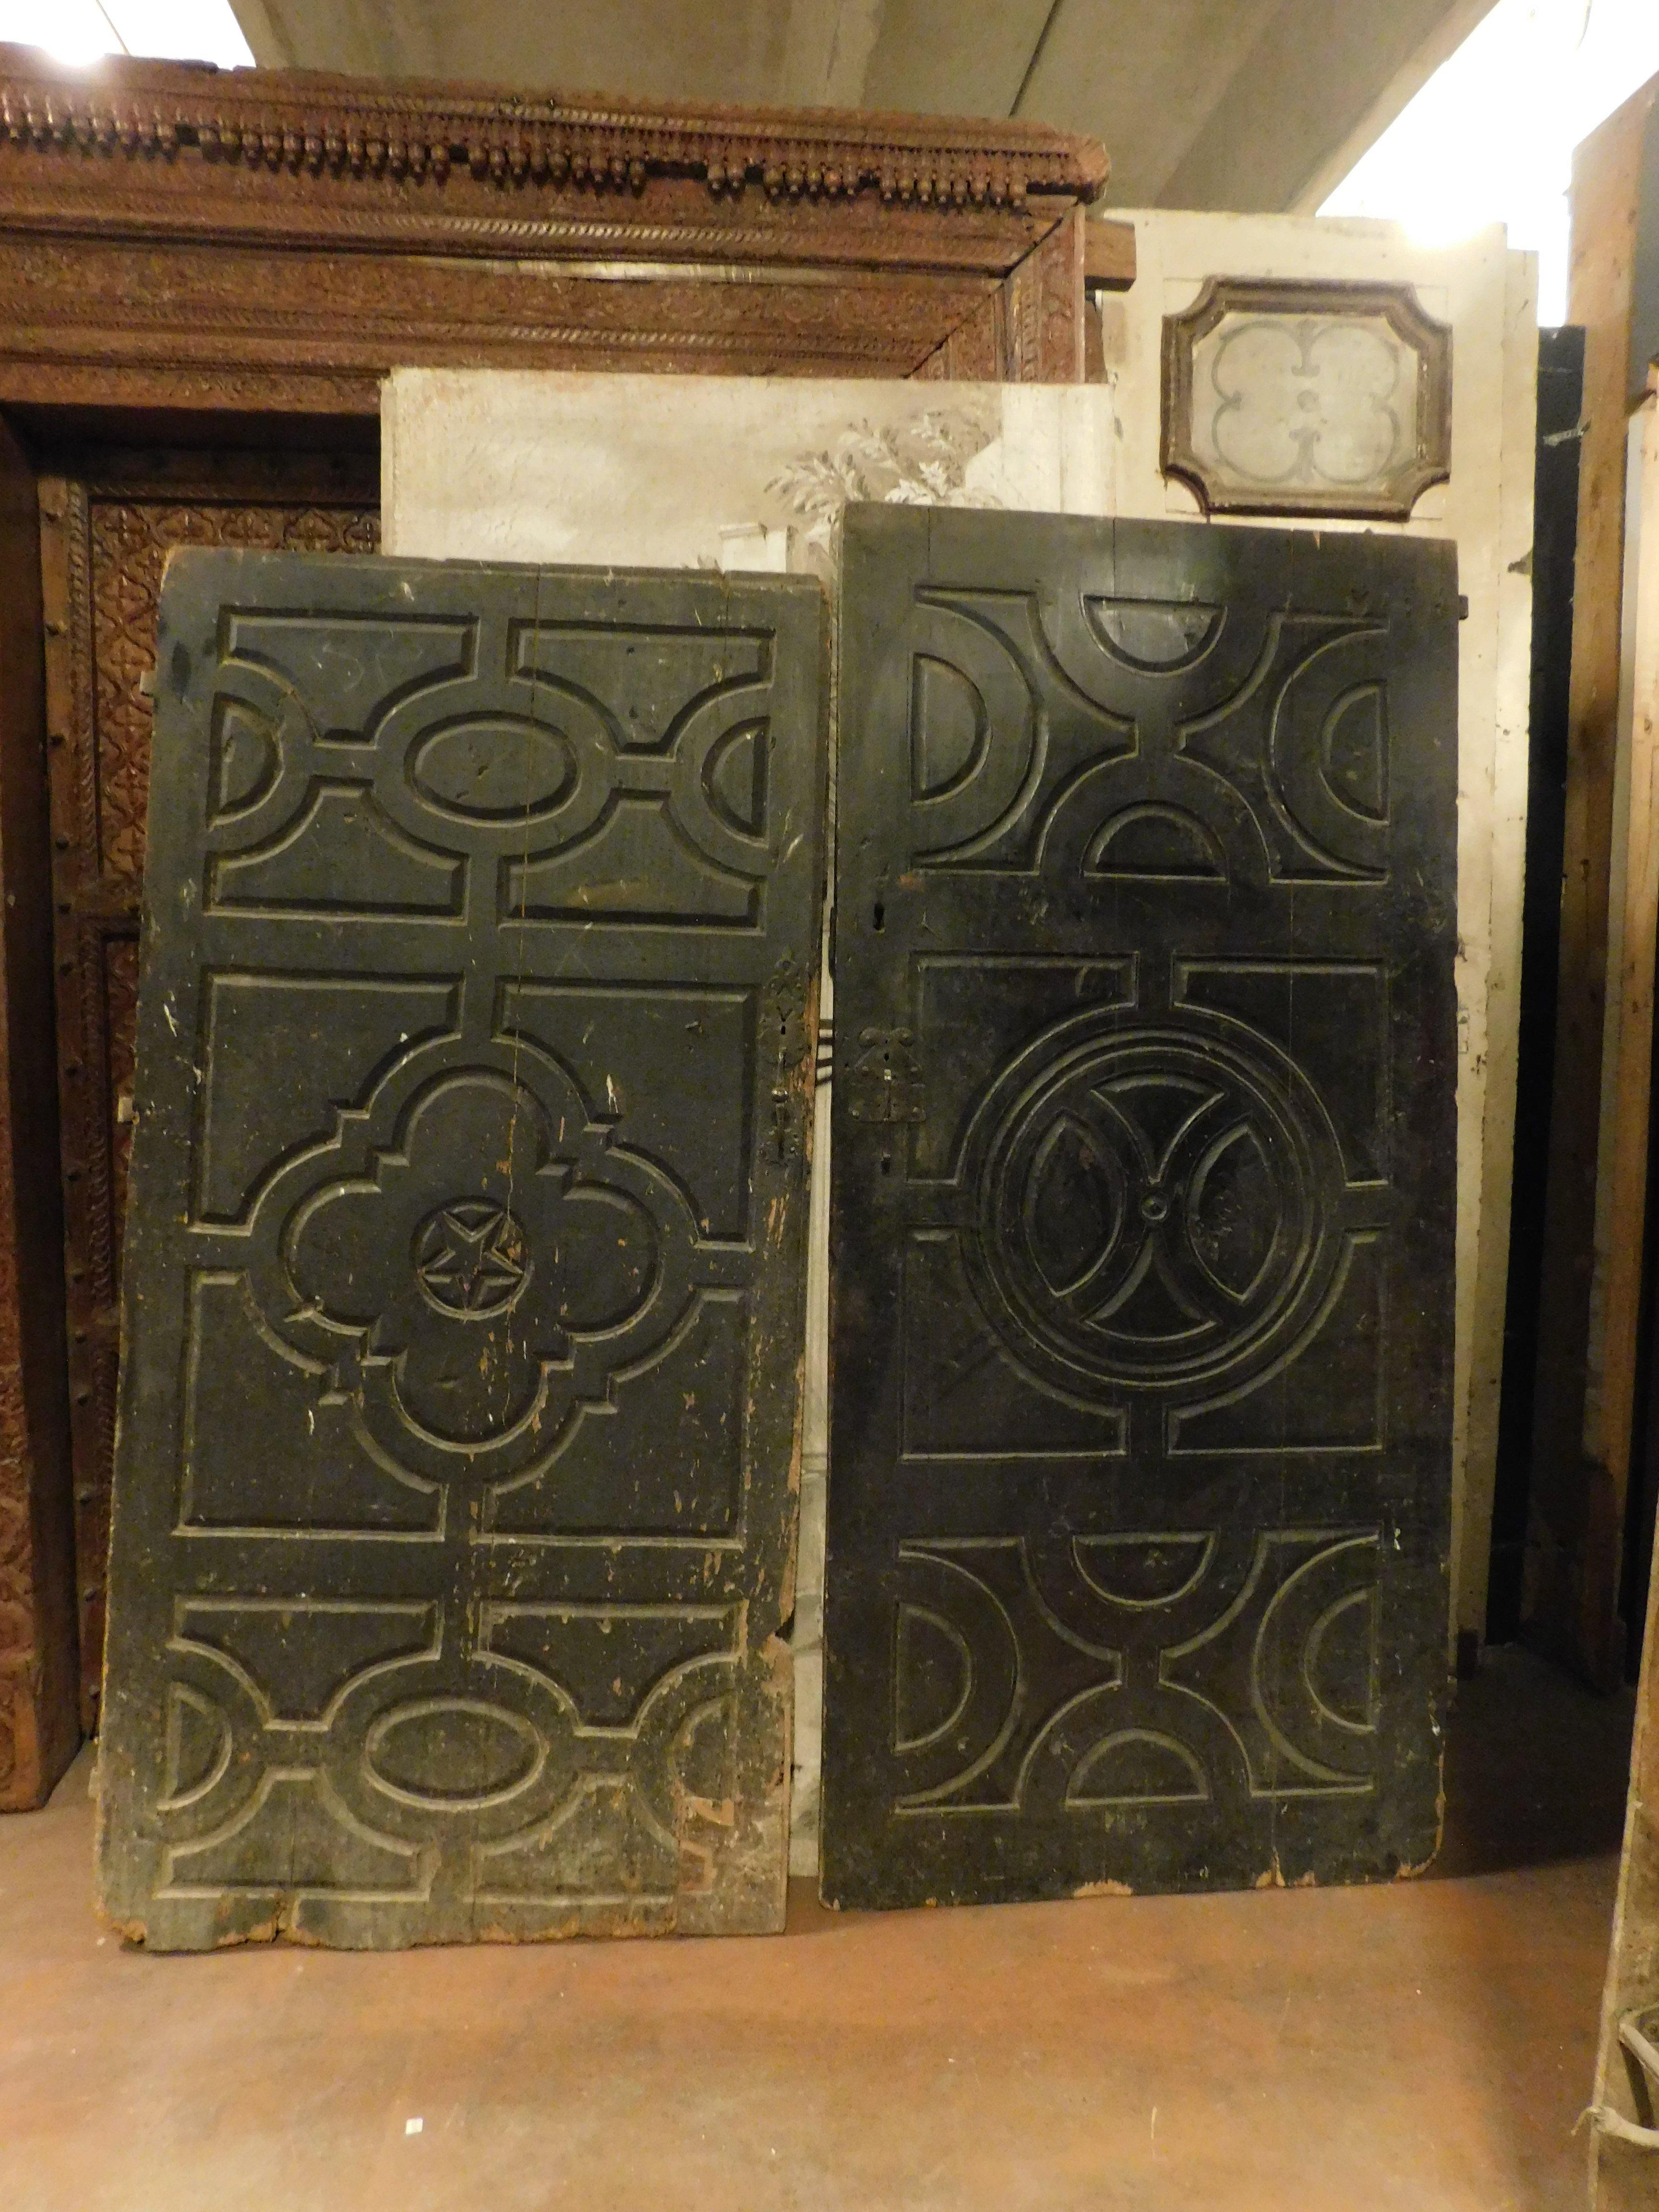 Ancient pair of old interior doors, hand-lacquered in black and hand-sculpted, built by hand in the 18th century in Italy, for a noble palace of the time.
They were installed on the wall without a frame, and could also be used as decorative